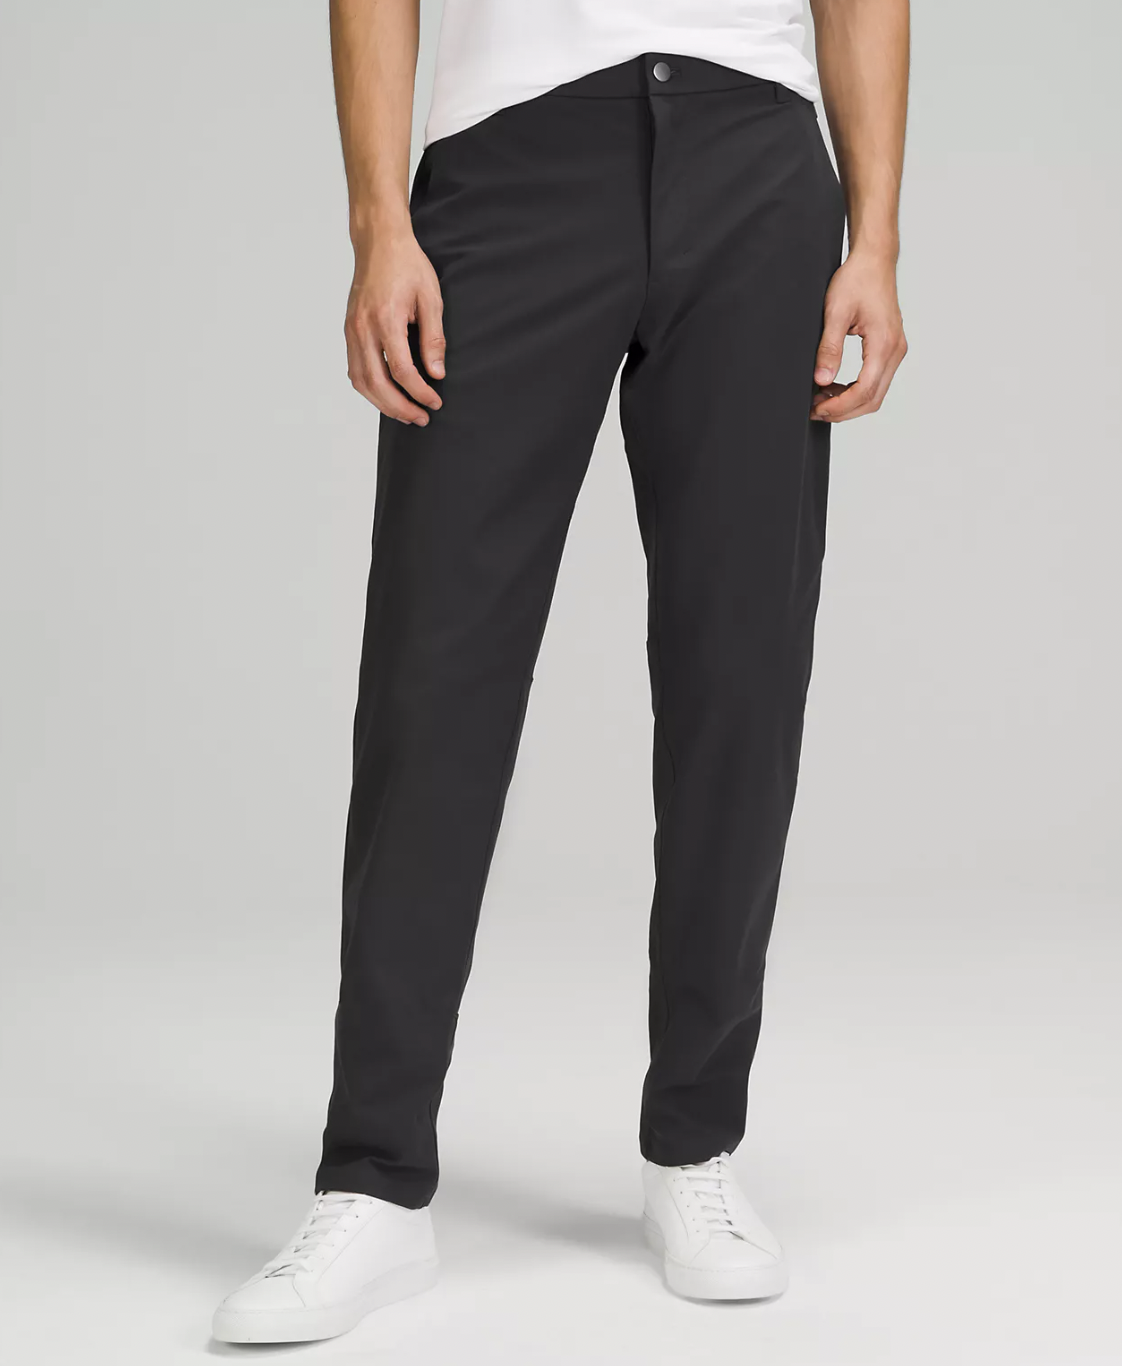 Aggregate more than 72 casual fit trousers - in.cdgdbentre